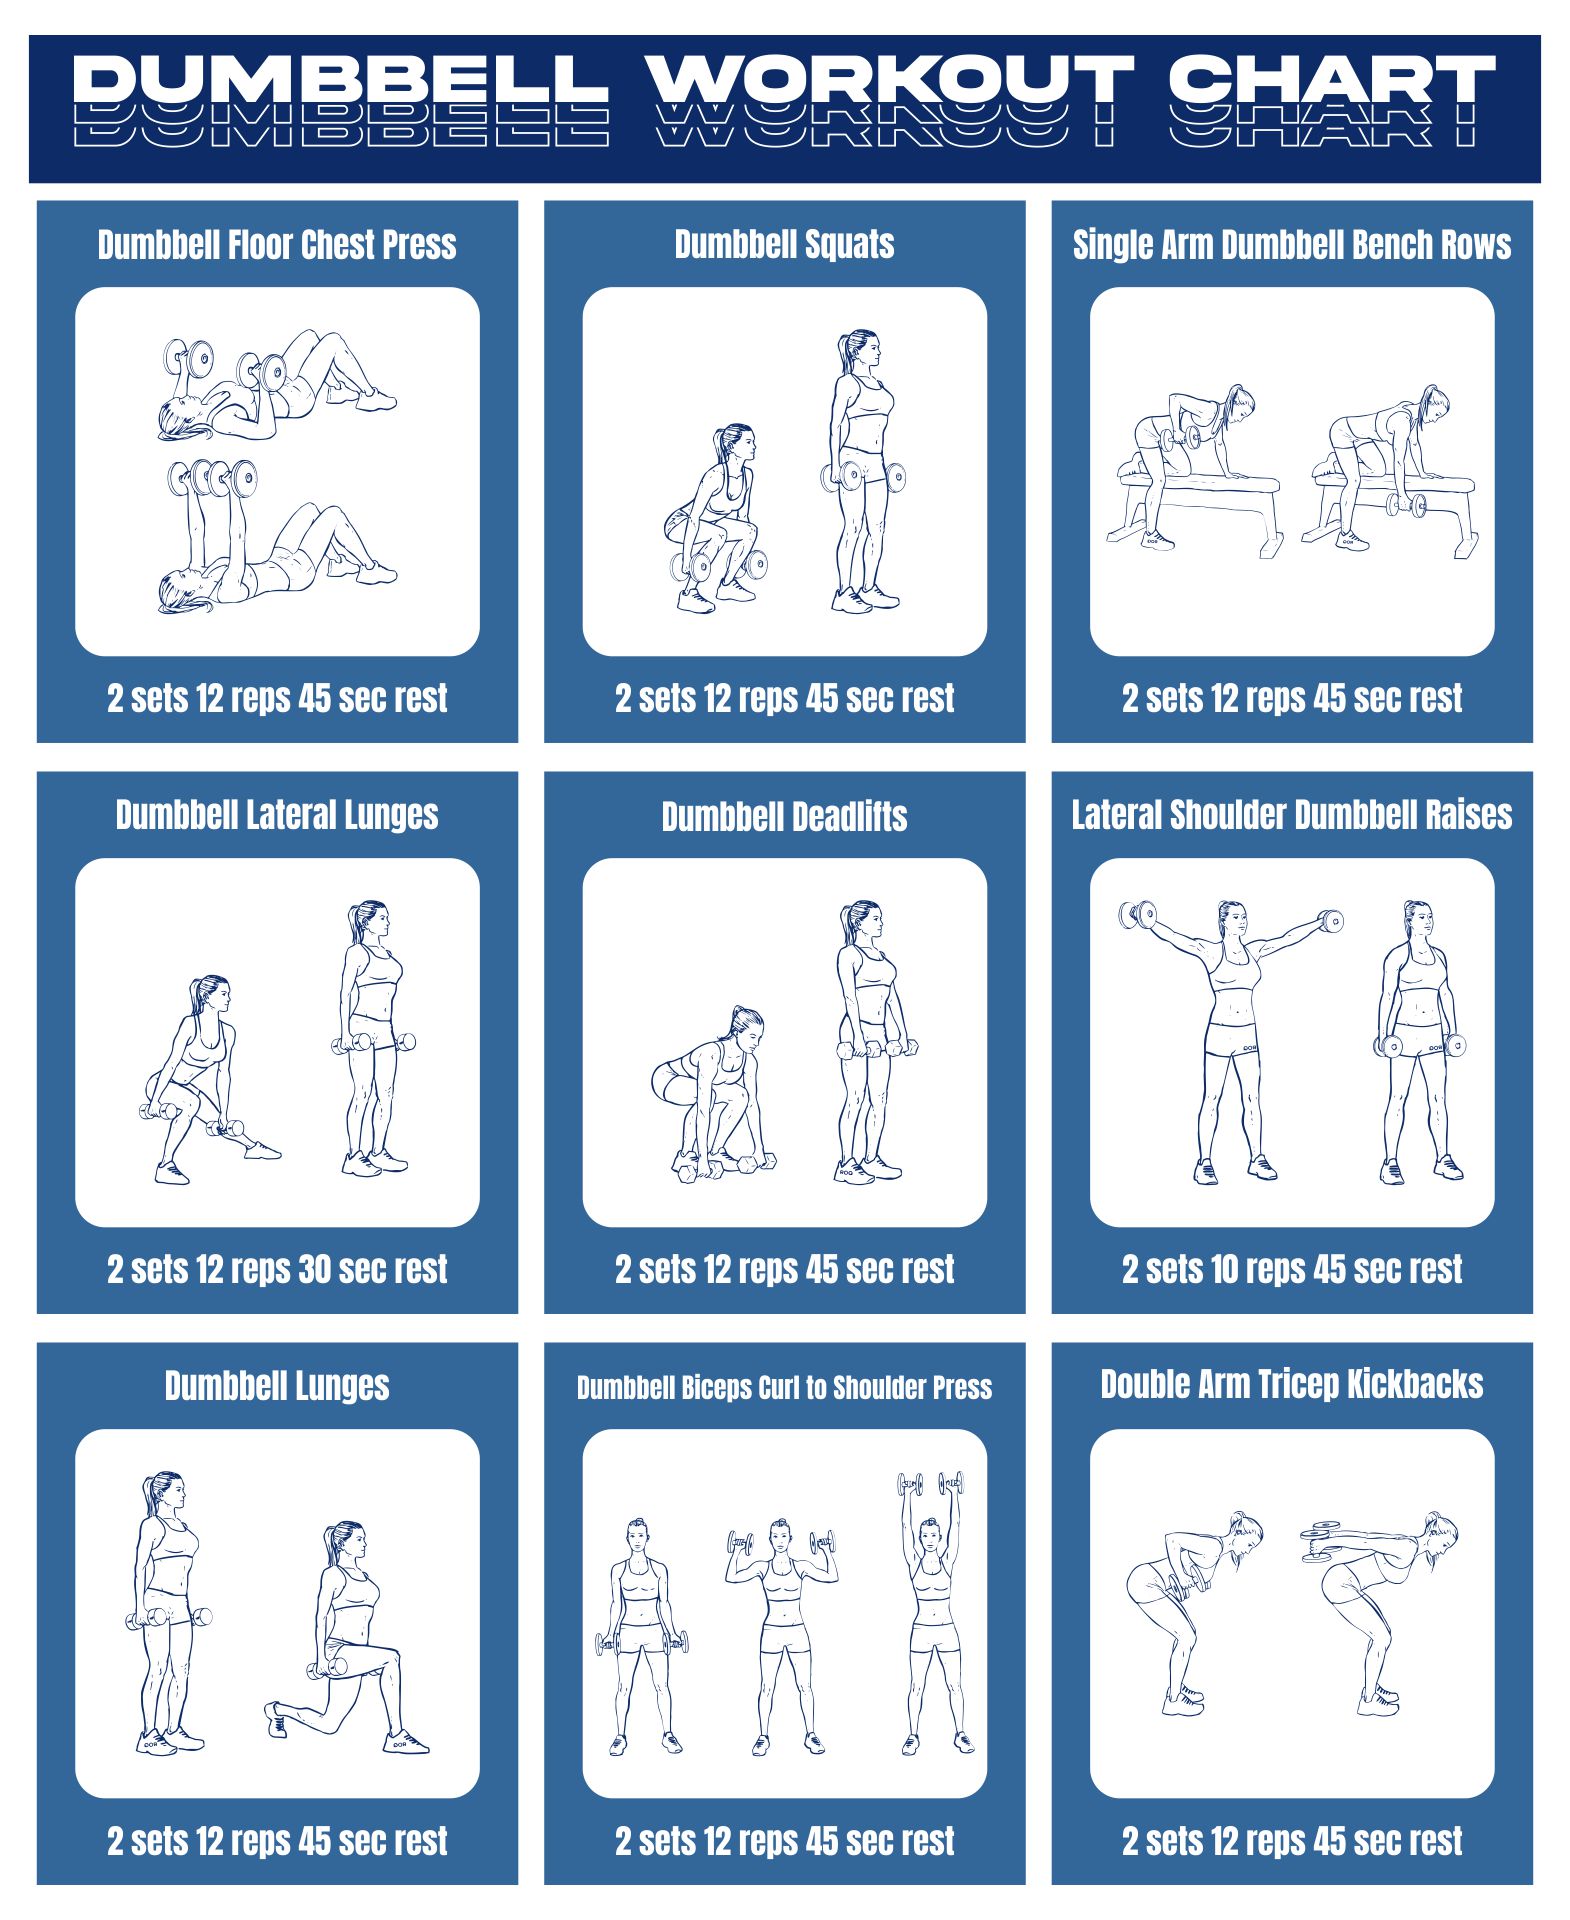 dumbbell-exercise-chart-pdf-dumbell-workout-workout-chart-dumbbell